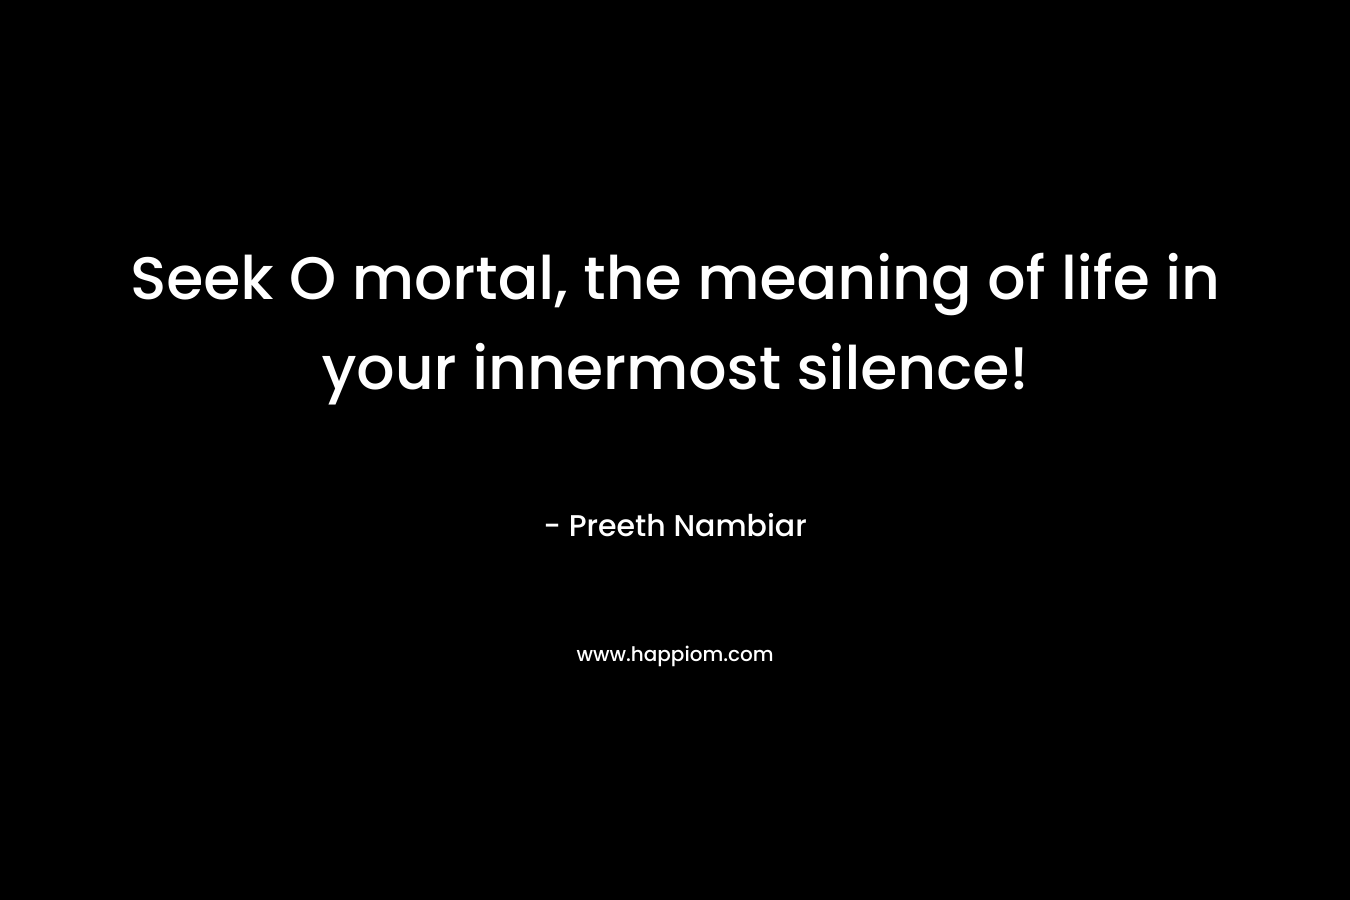 Seek O mortal, the meaning of life in your innermost silence!